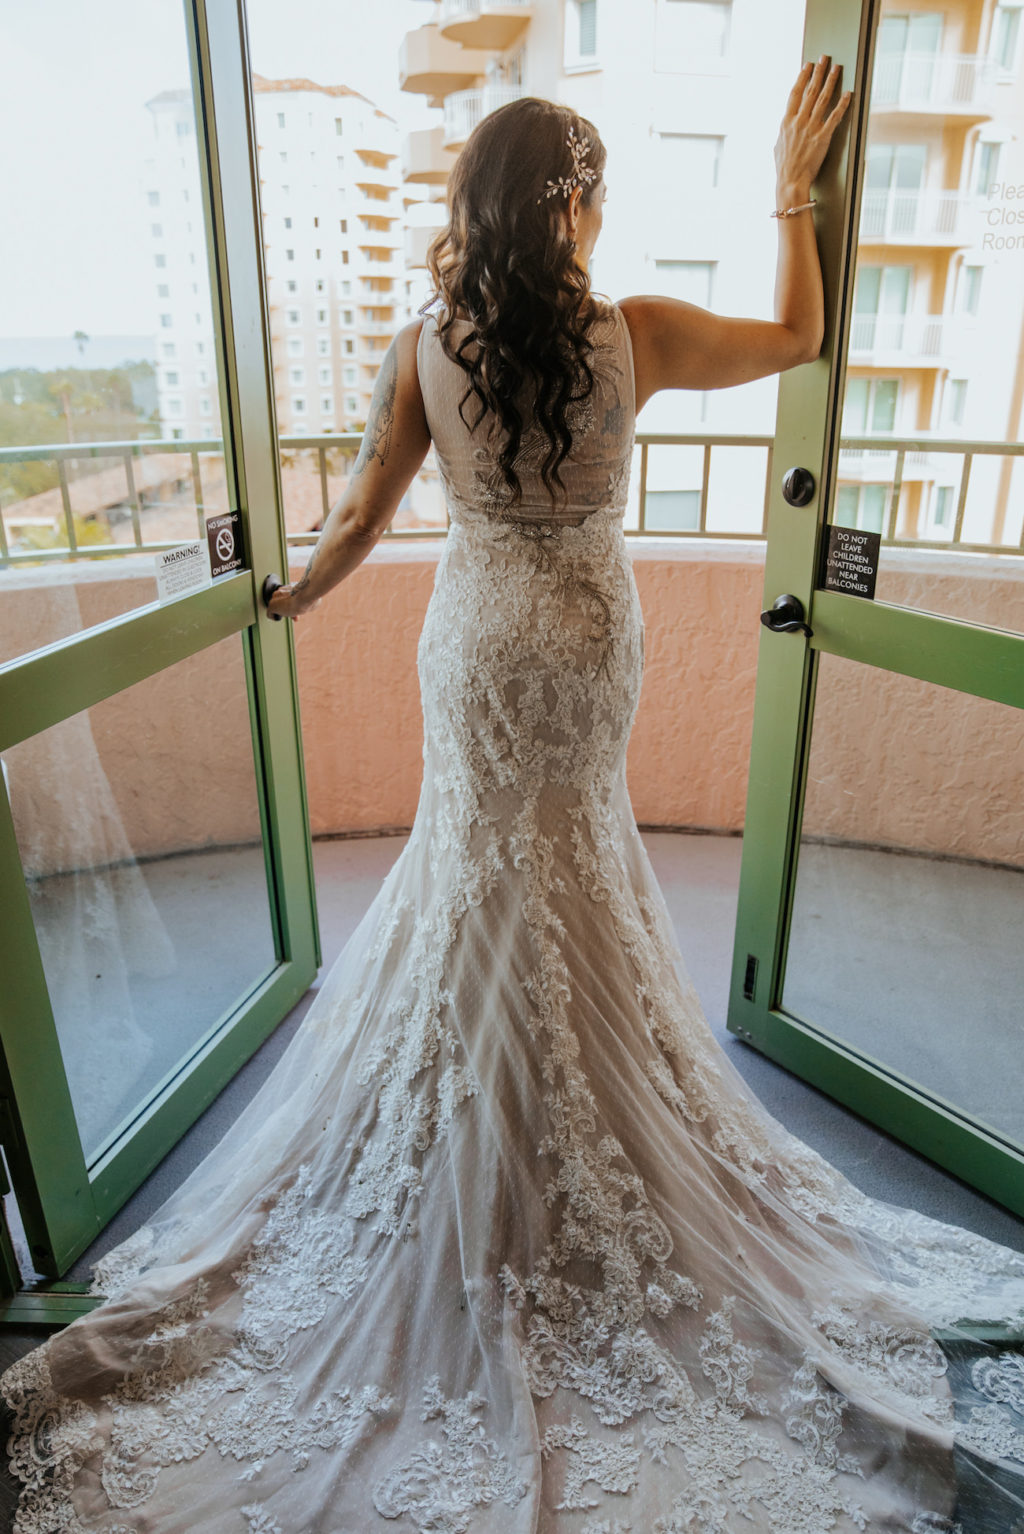 Bride Window Door Balcony Portrait in Illusion Lace V Neck Sheath Bridal Gown Wedding Dress with Champagne Liner by Ashley and Justin Bride